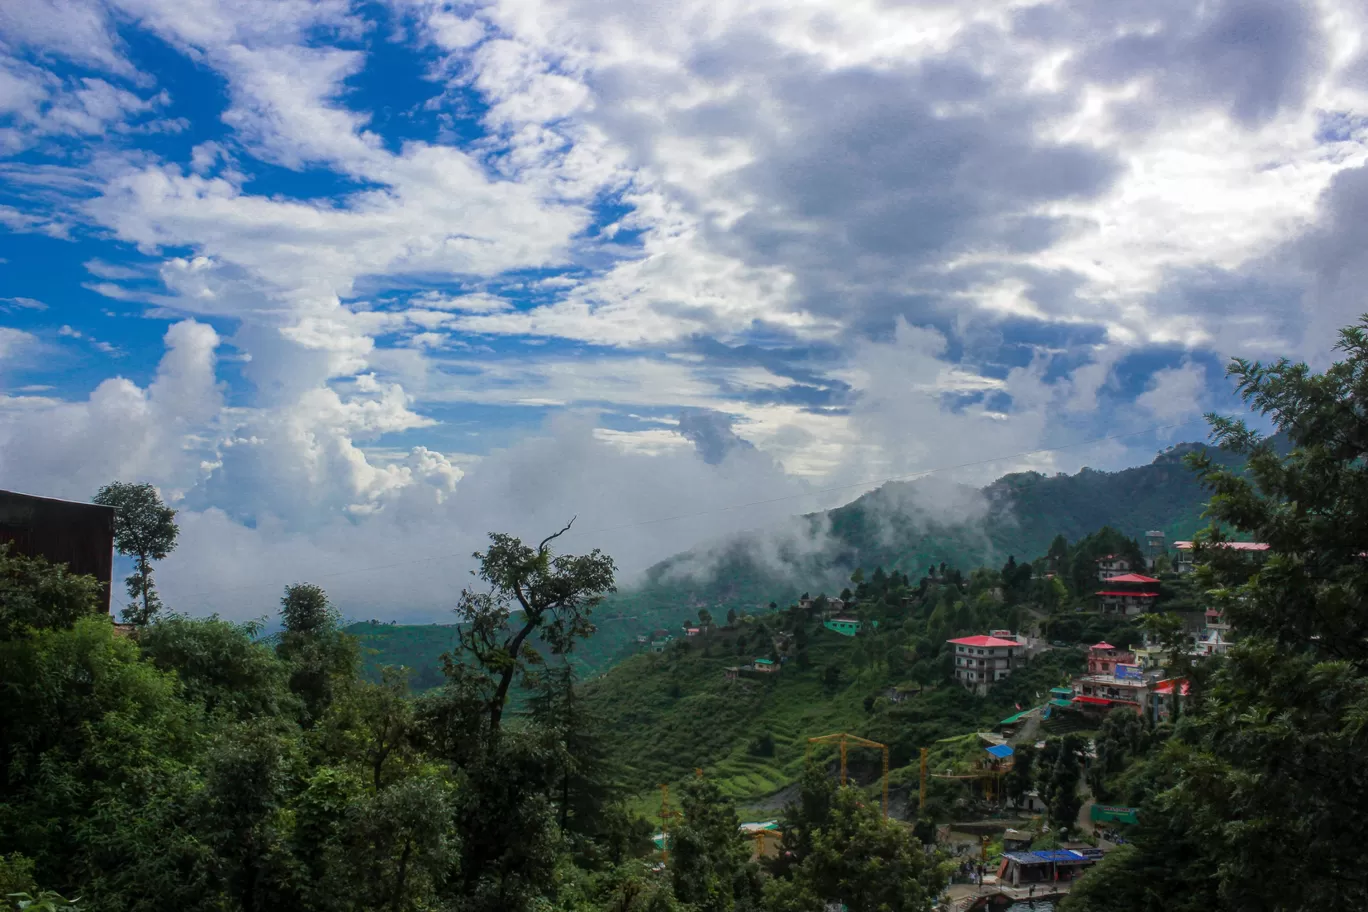 Photo of Mussoorie By Aastha B. Vyas